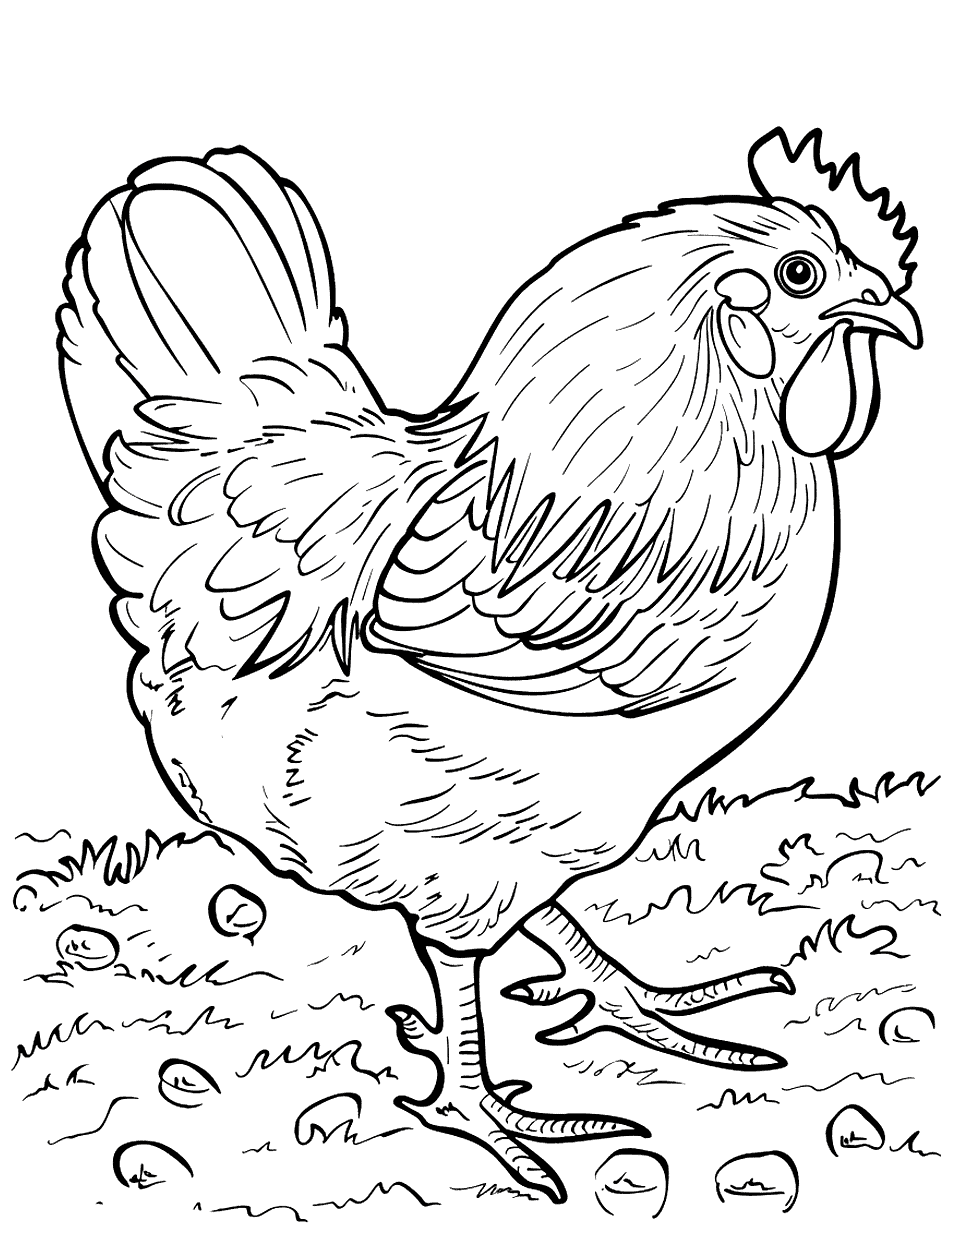 Realistic Hen on a Farm Chicken Coloring Page - A detailed, realistic hen on the ground.